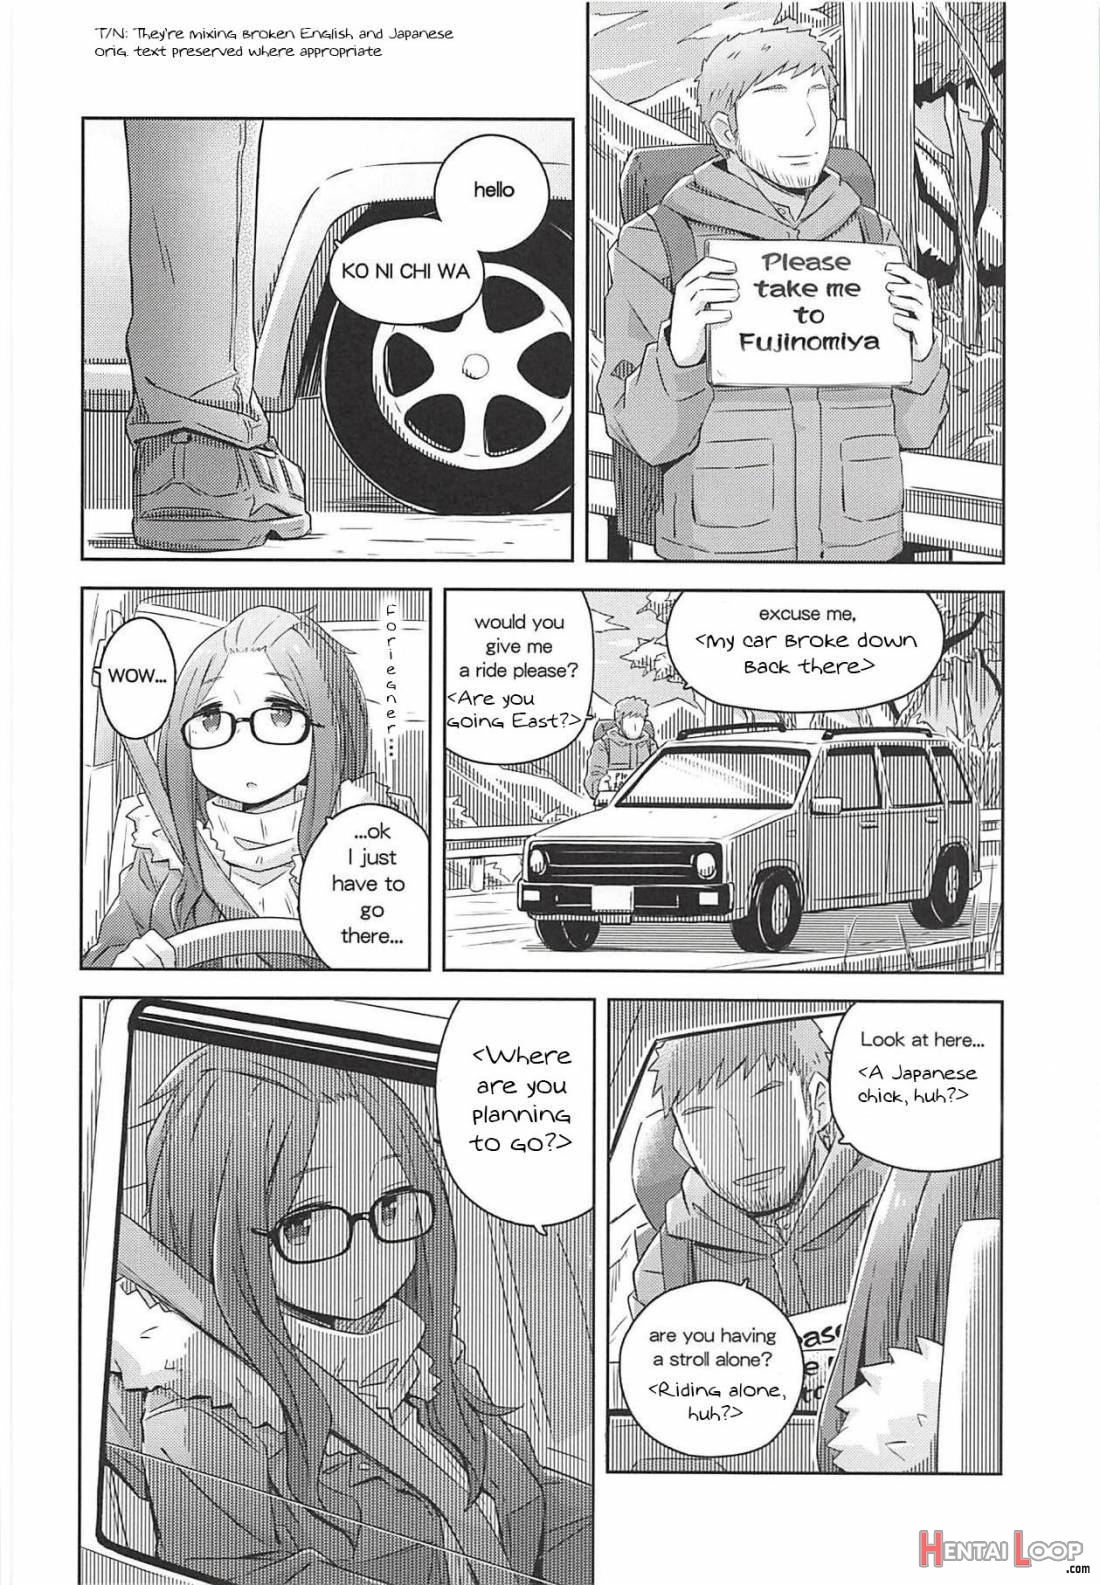 The Open Road page 4